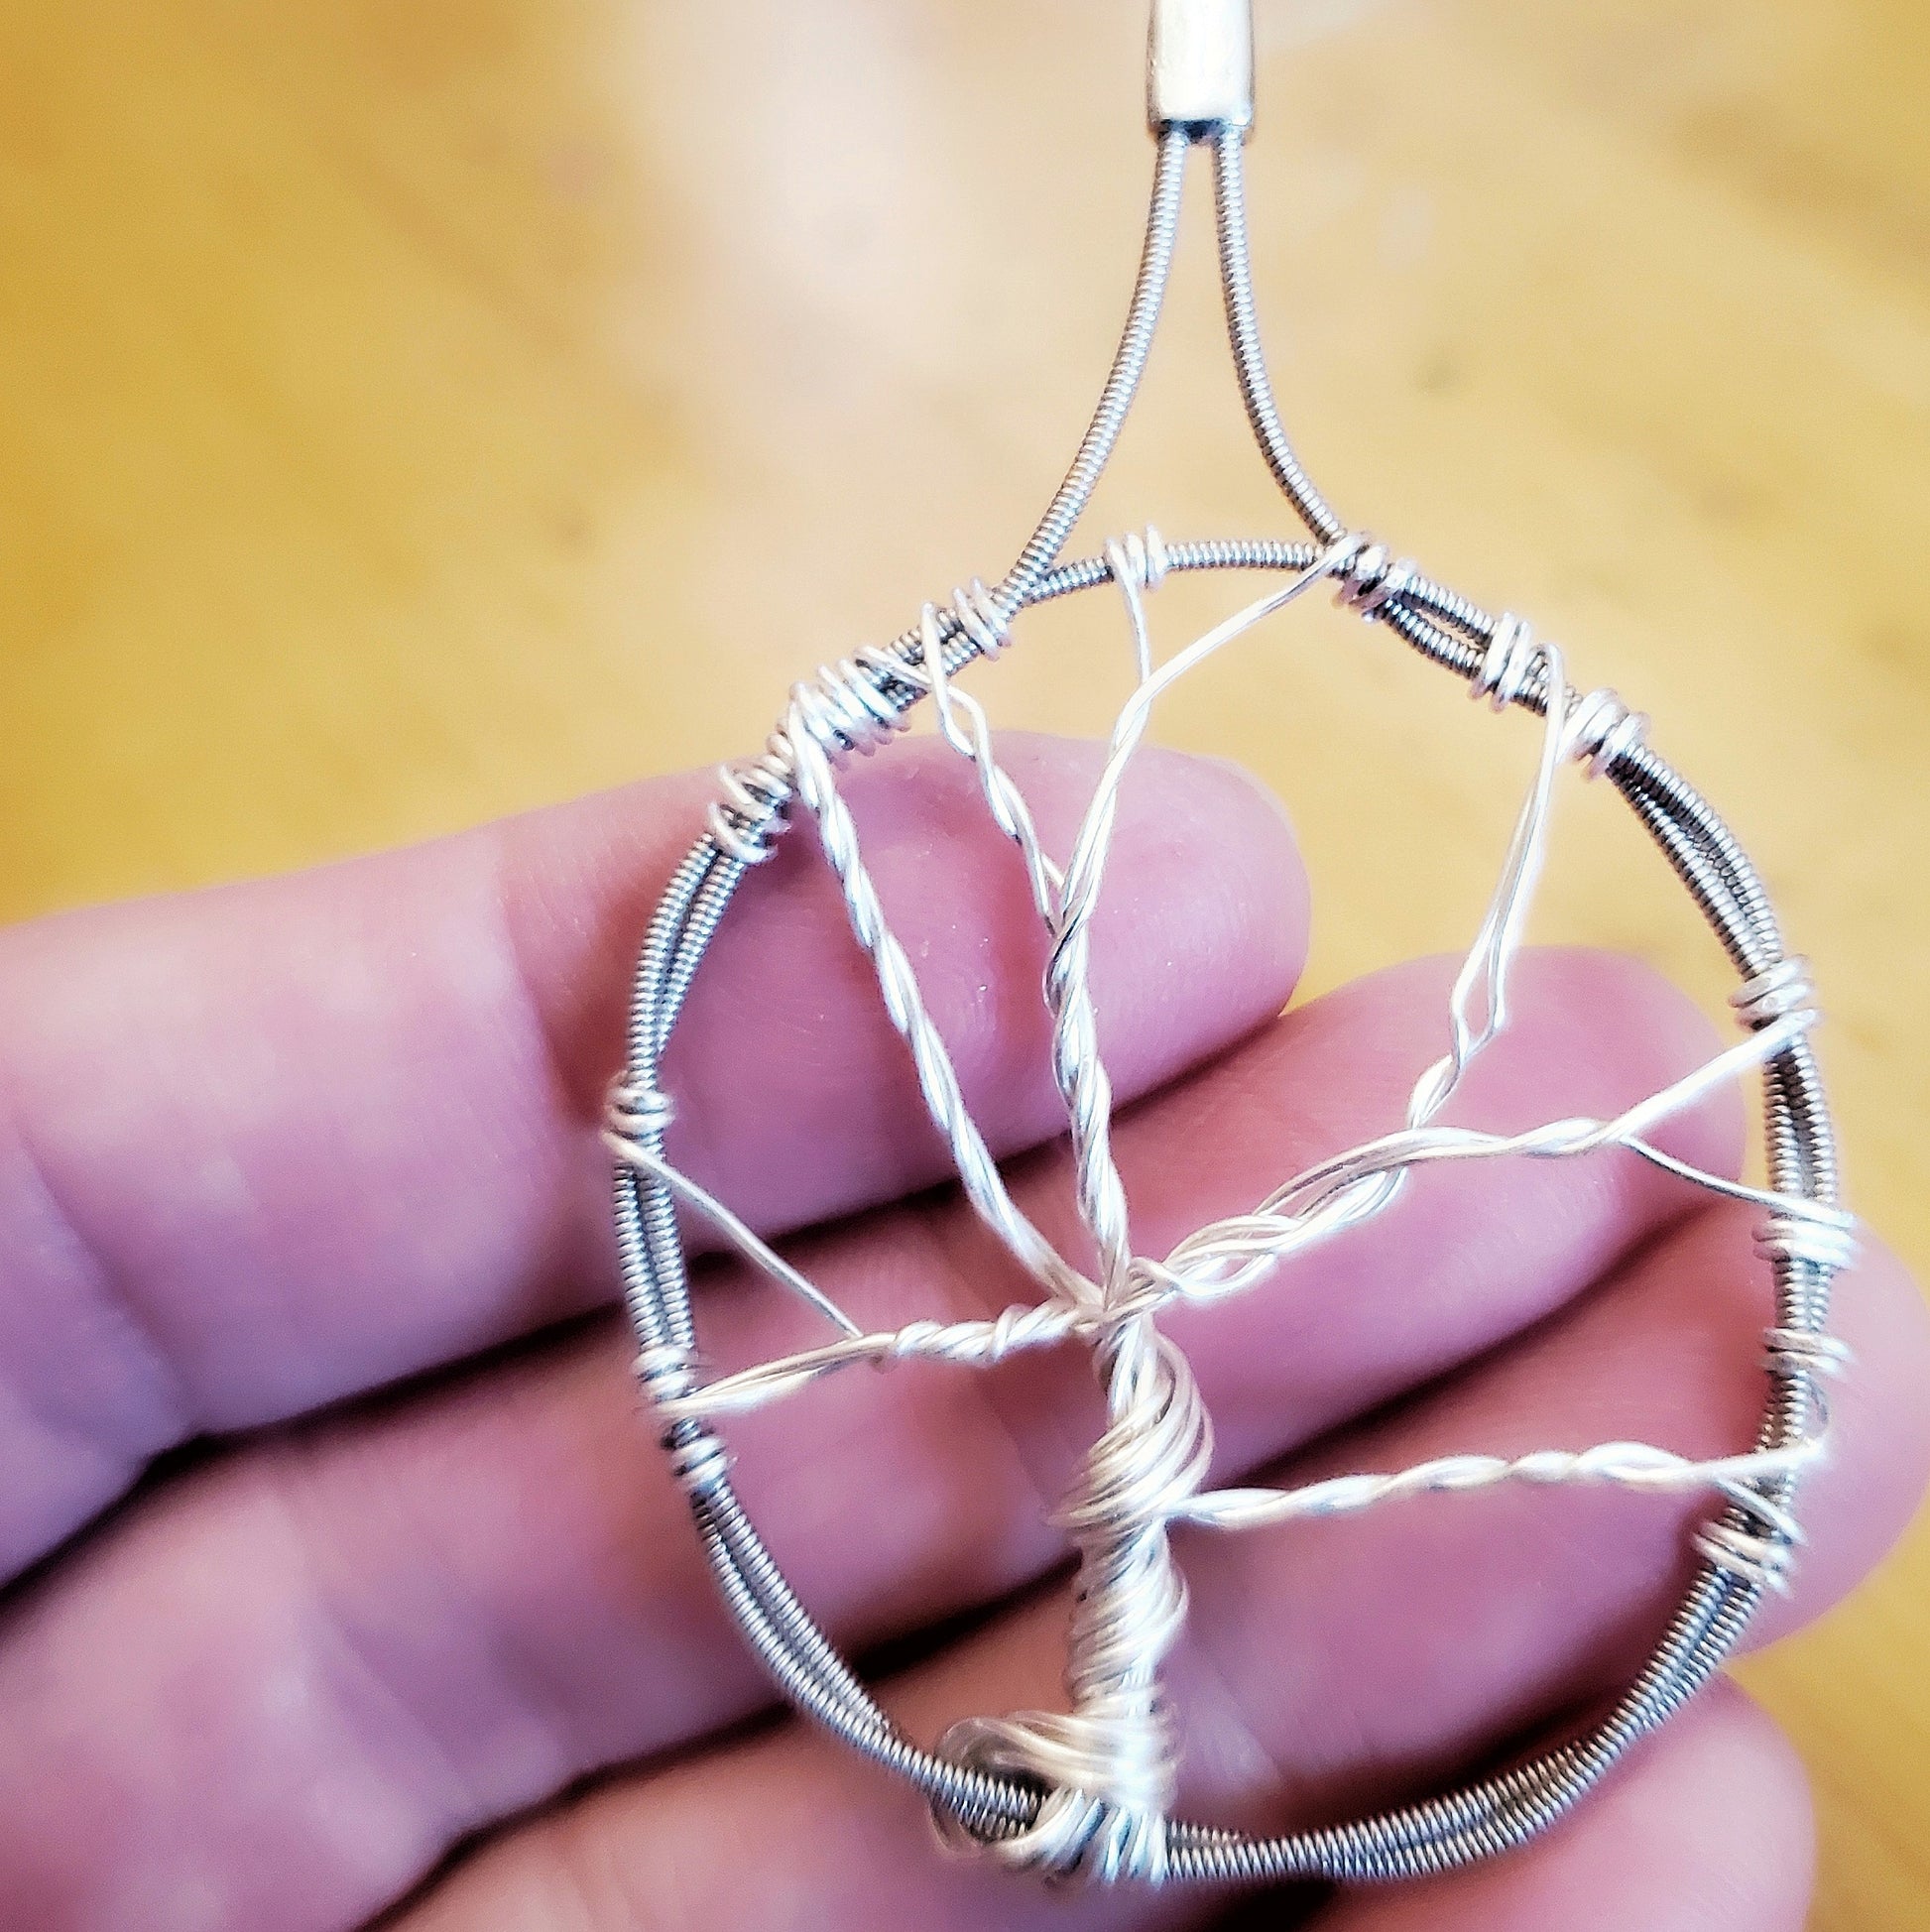 a pendant in the shape of a tree with a circle around it - the tree is made of silver coloured wire and the circle is made from upcycled guitar strings - the pendant sits on a person's fingers